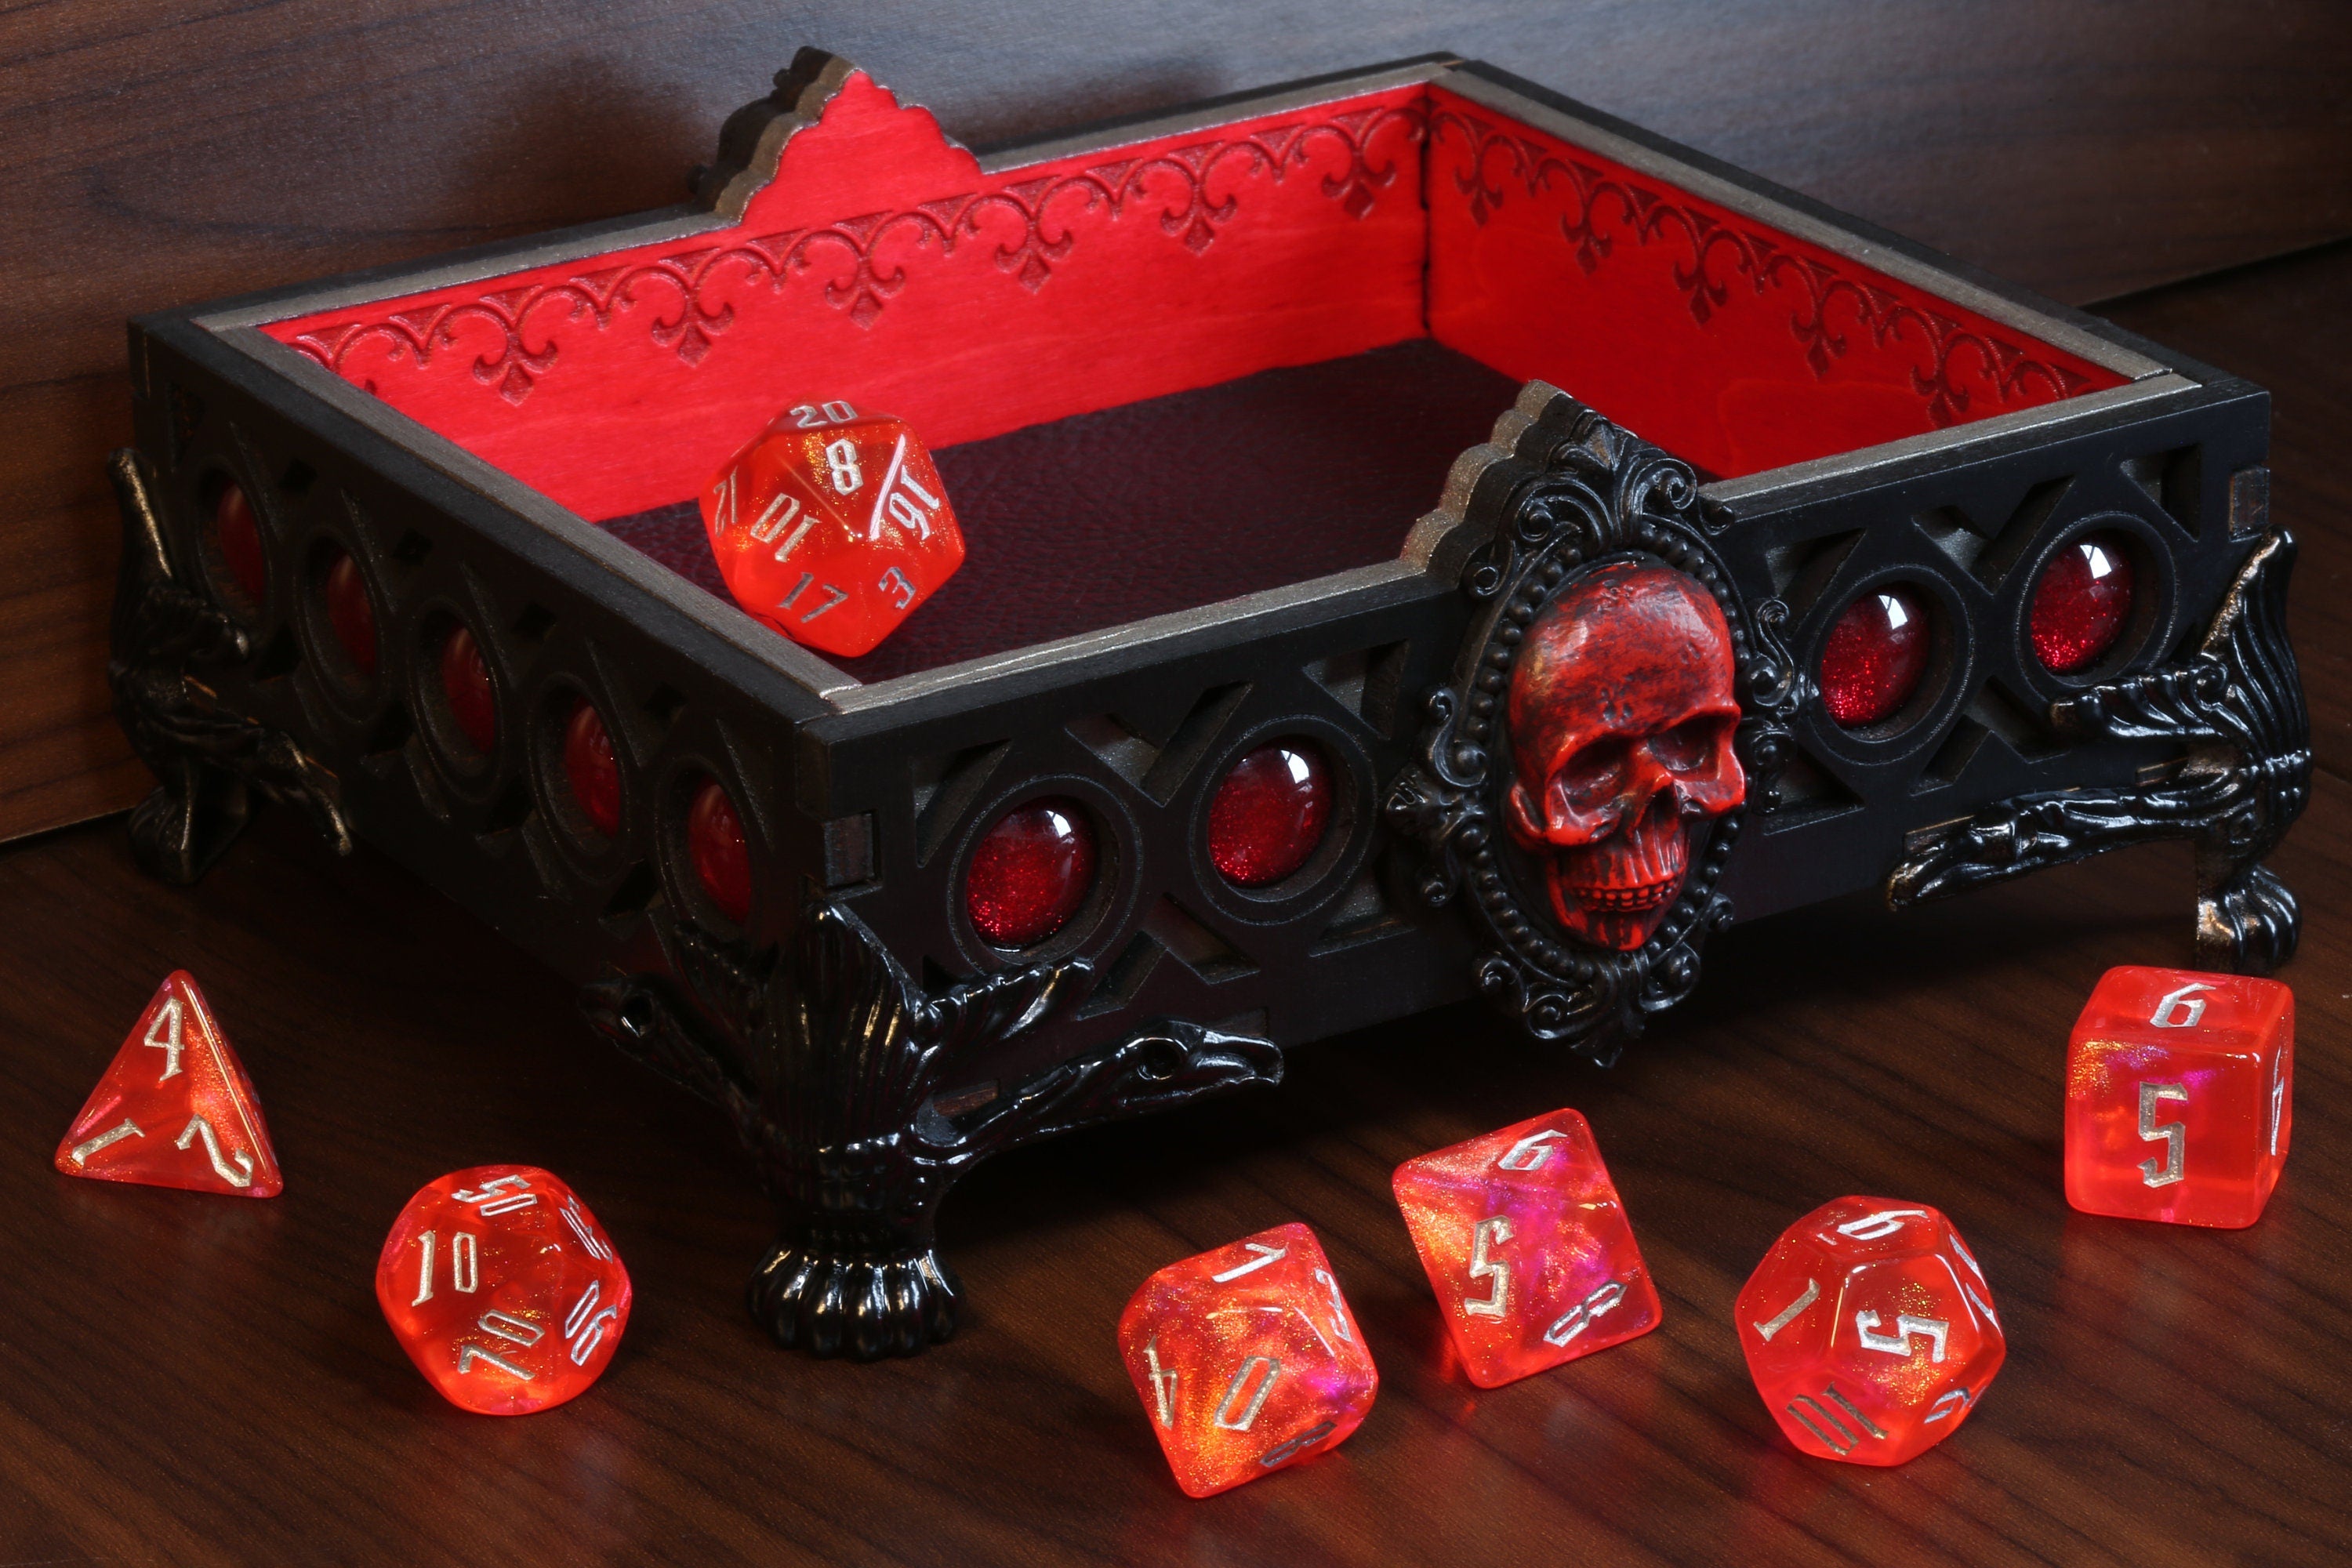 Red Necromancer dice tray for tabletop role playing games, Dungeons and Dragons, DND, D&D  - Made to order - The Wizard's Vault